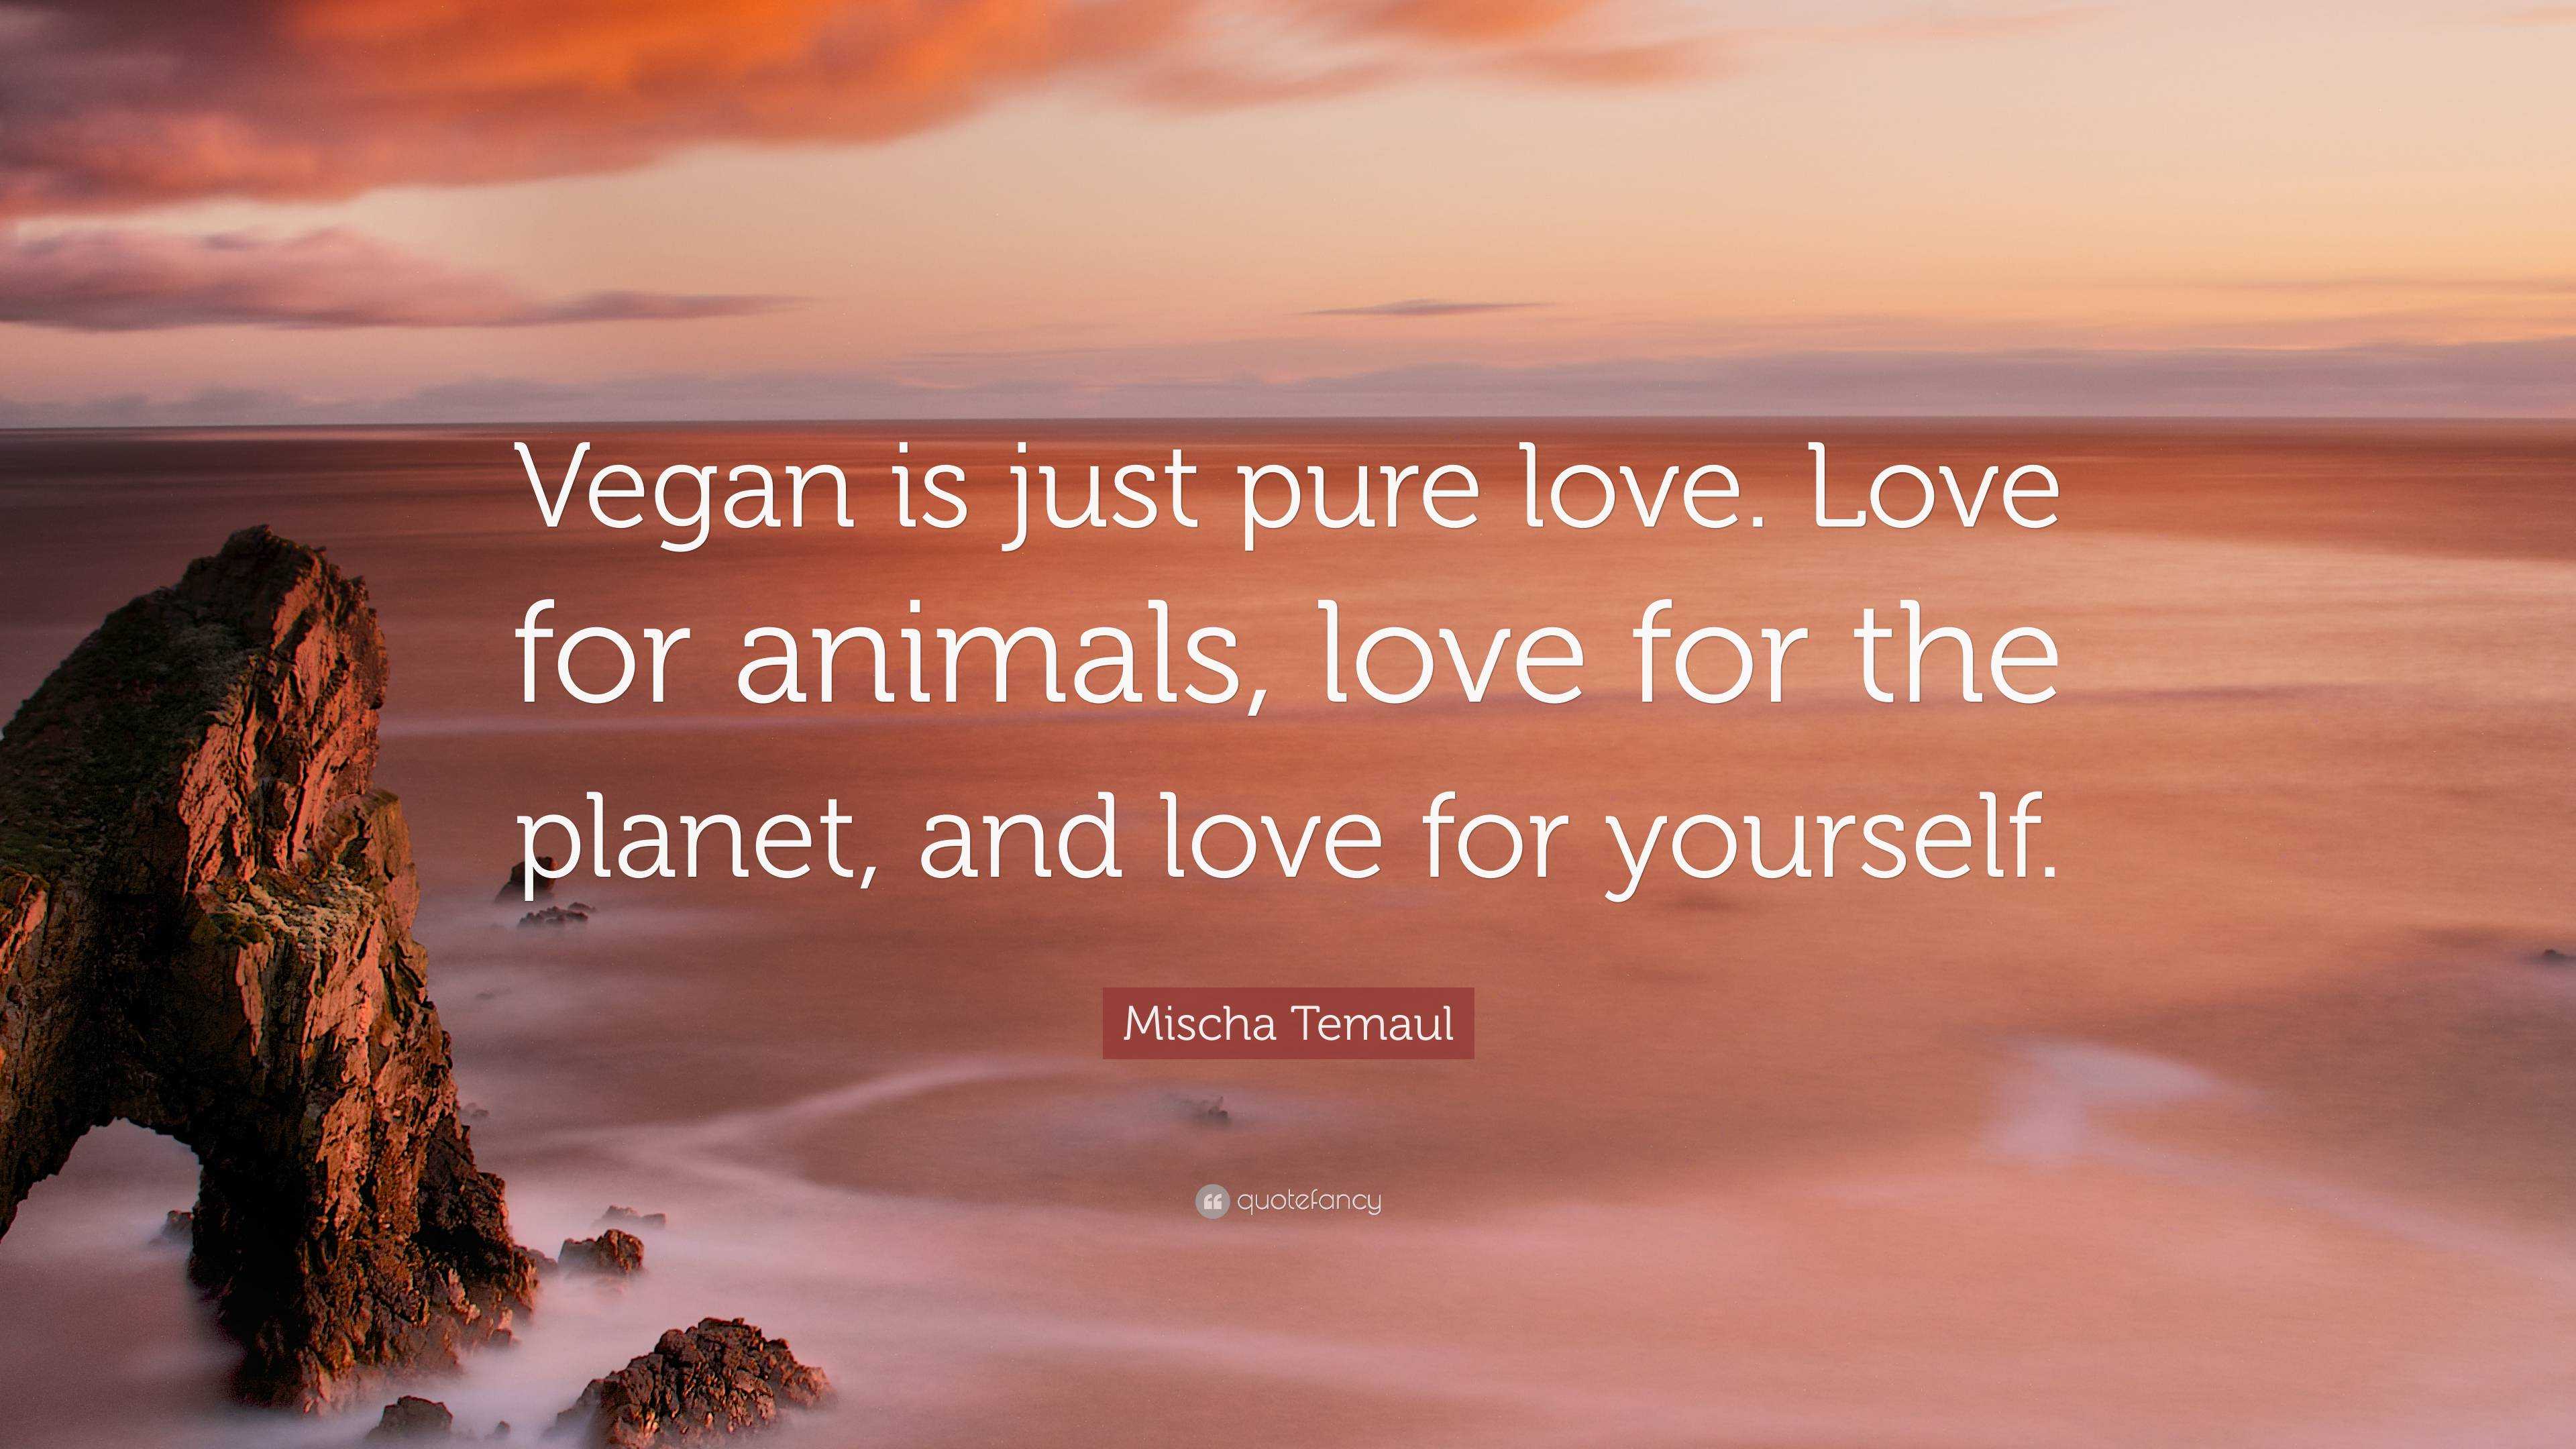 Mischa Temaul Quote: “Vegan is just pure love. Love for animals, love for  the planet, and